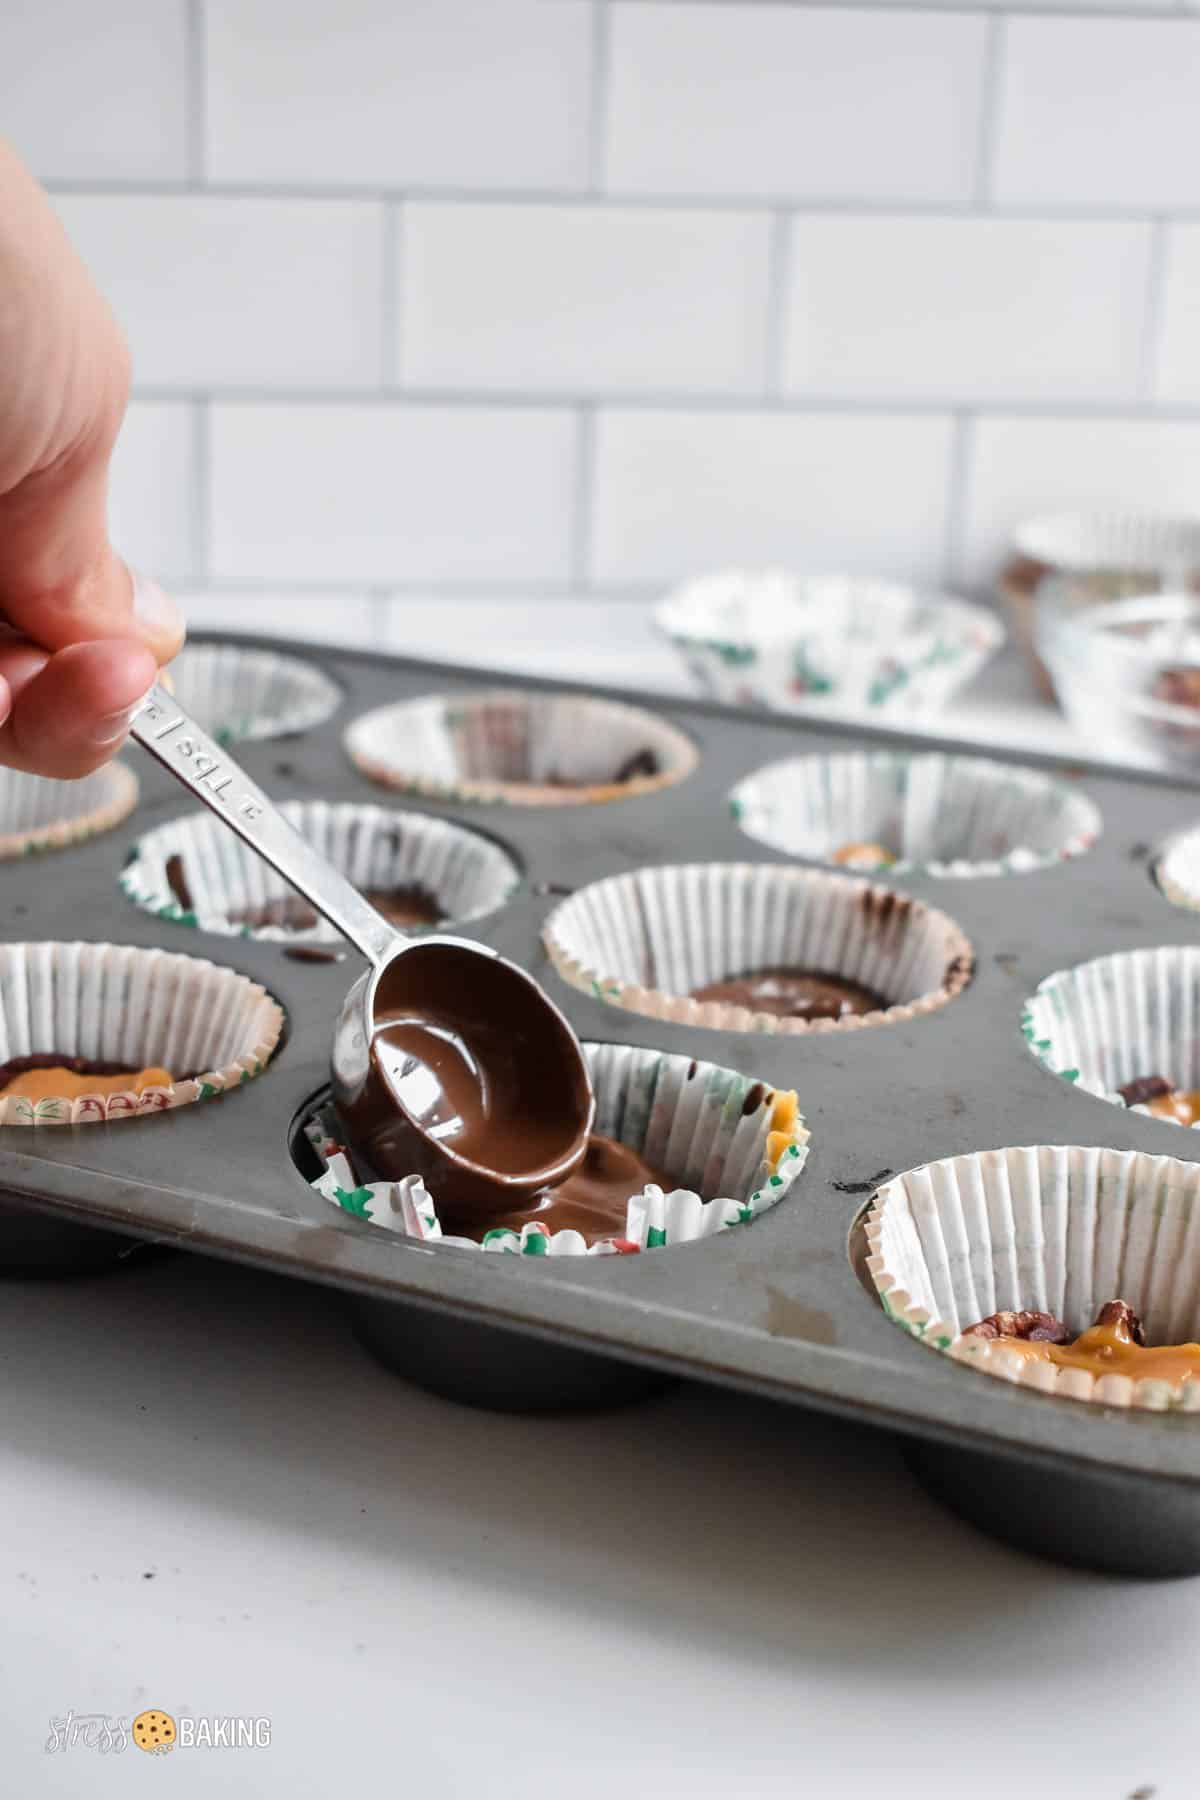 Melted chocolate being smoothed out in a muffin tin